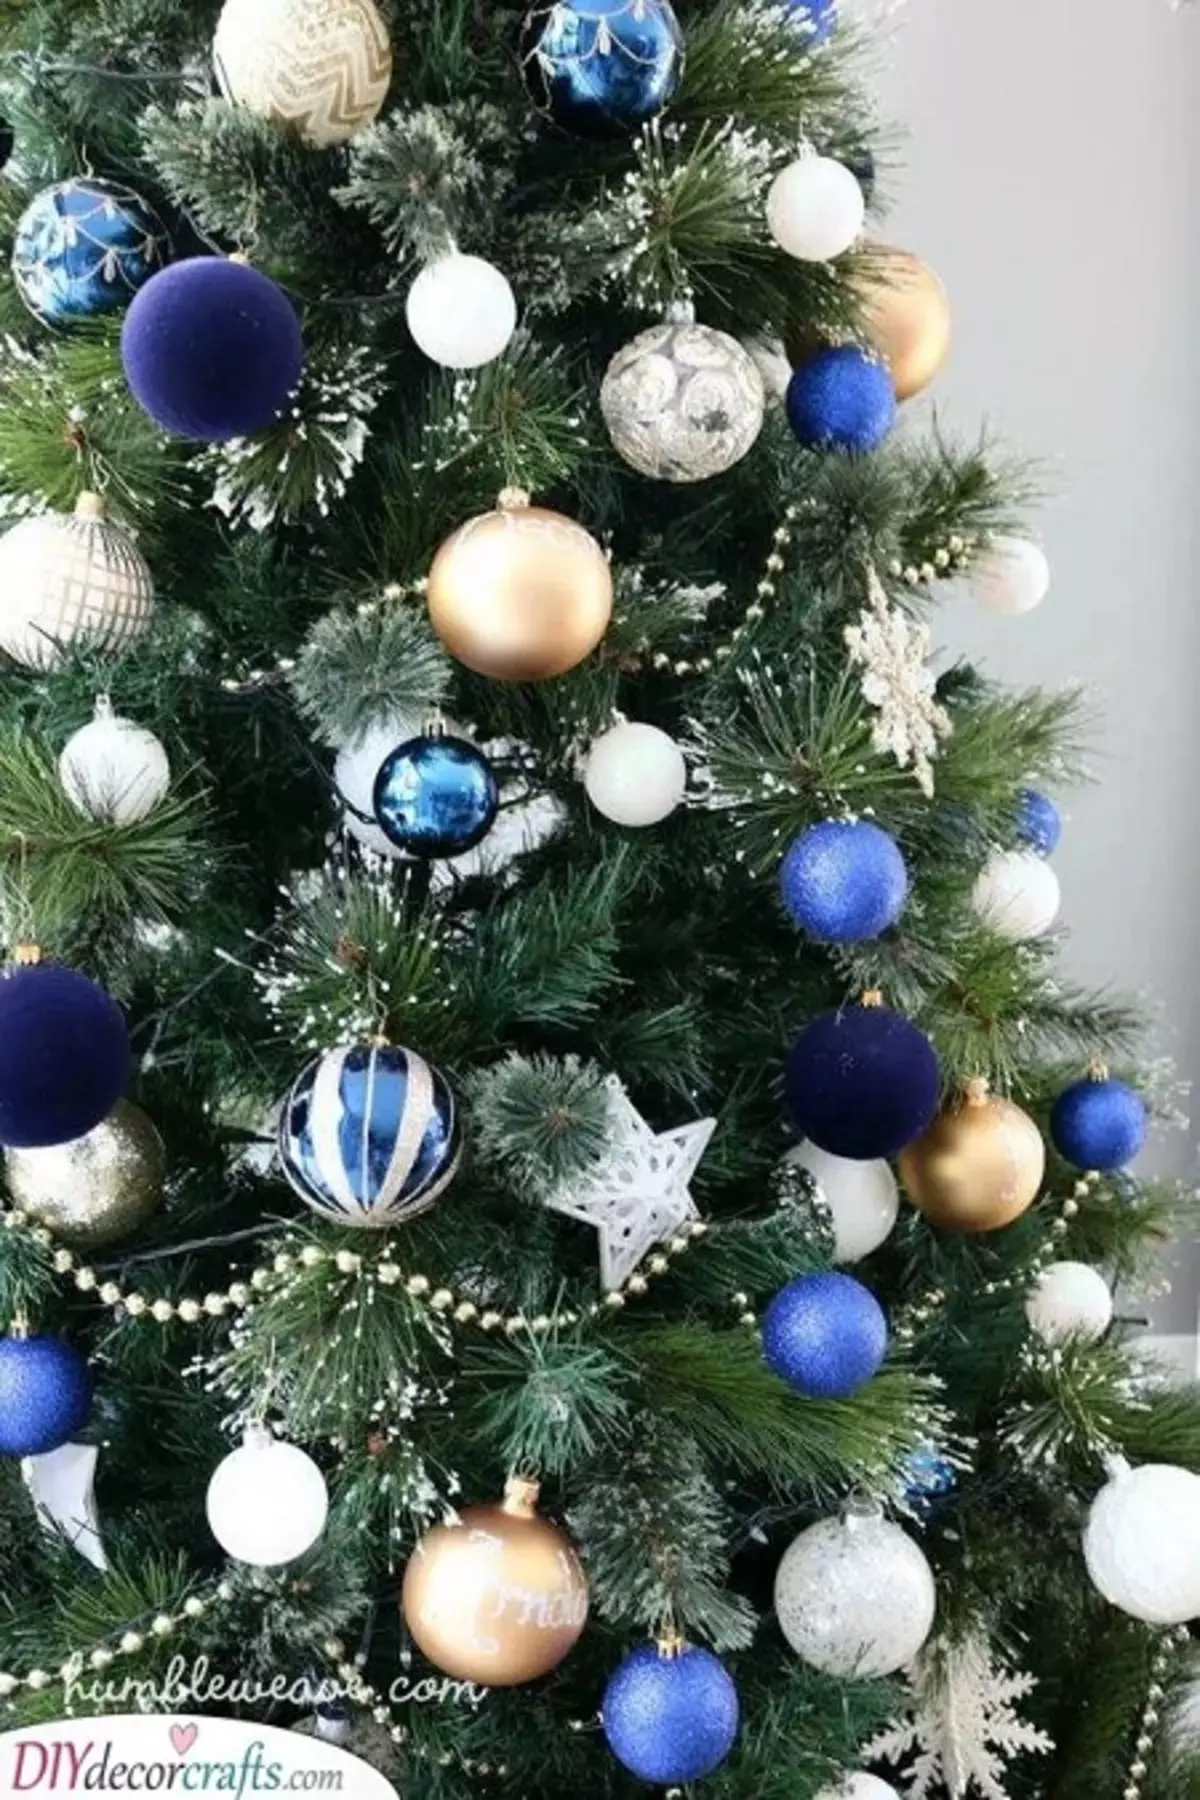 How to decorate the Christmas tree in blue-silver color? 30 photos How to dress up with balls and other decorations in blue and silver tones? 7627_5